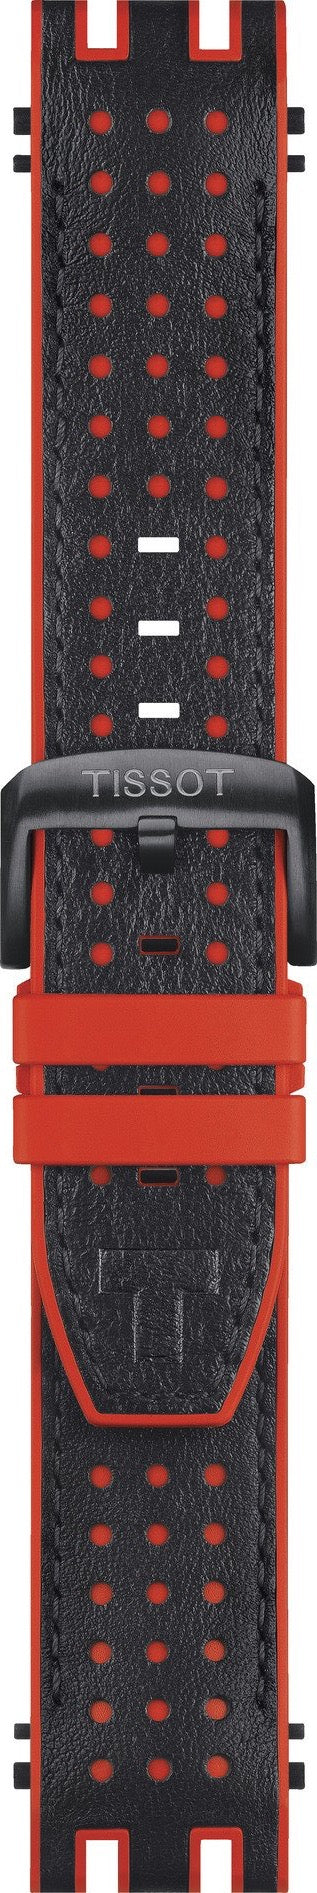 Tissot T-Race T115417 Black / Red Rubber Watch Strap Band - WATCHBAND EXPERT